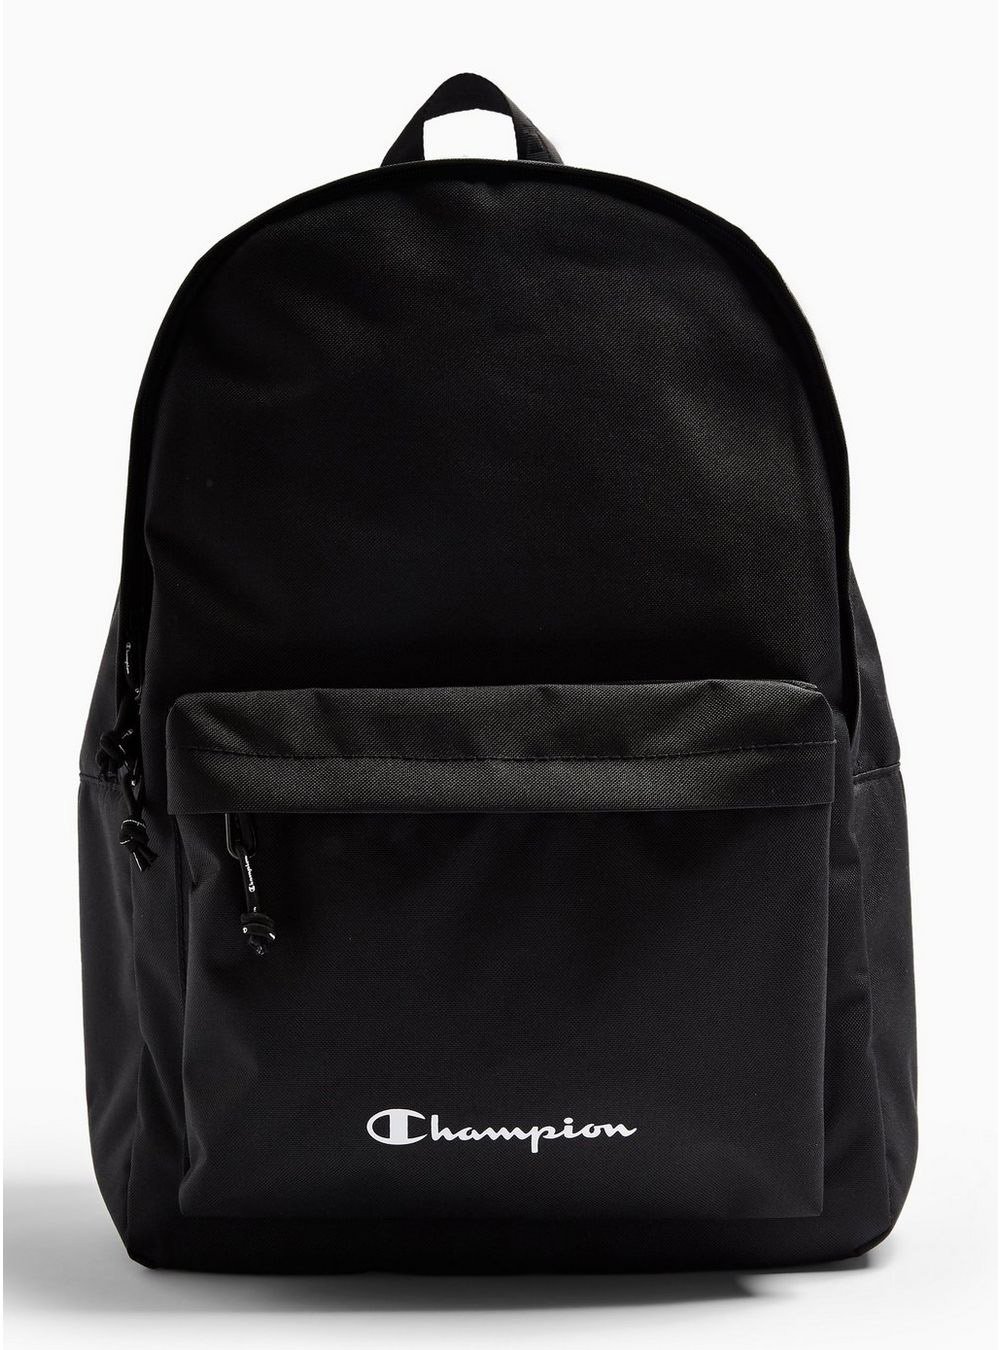 navy champion backpack